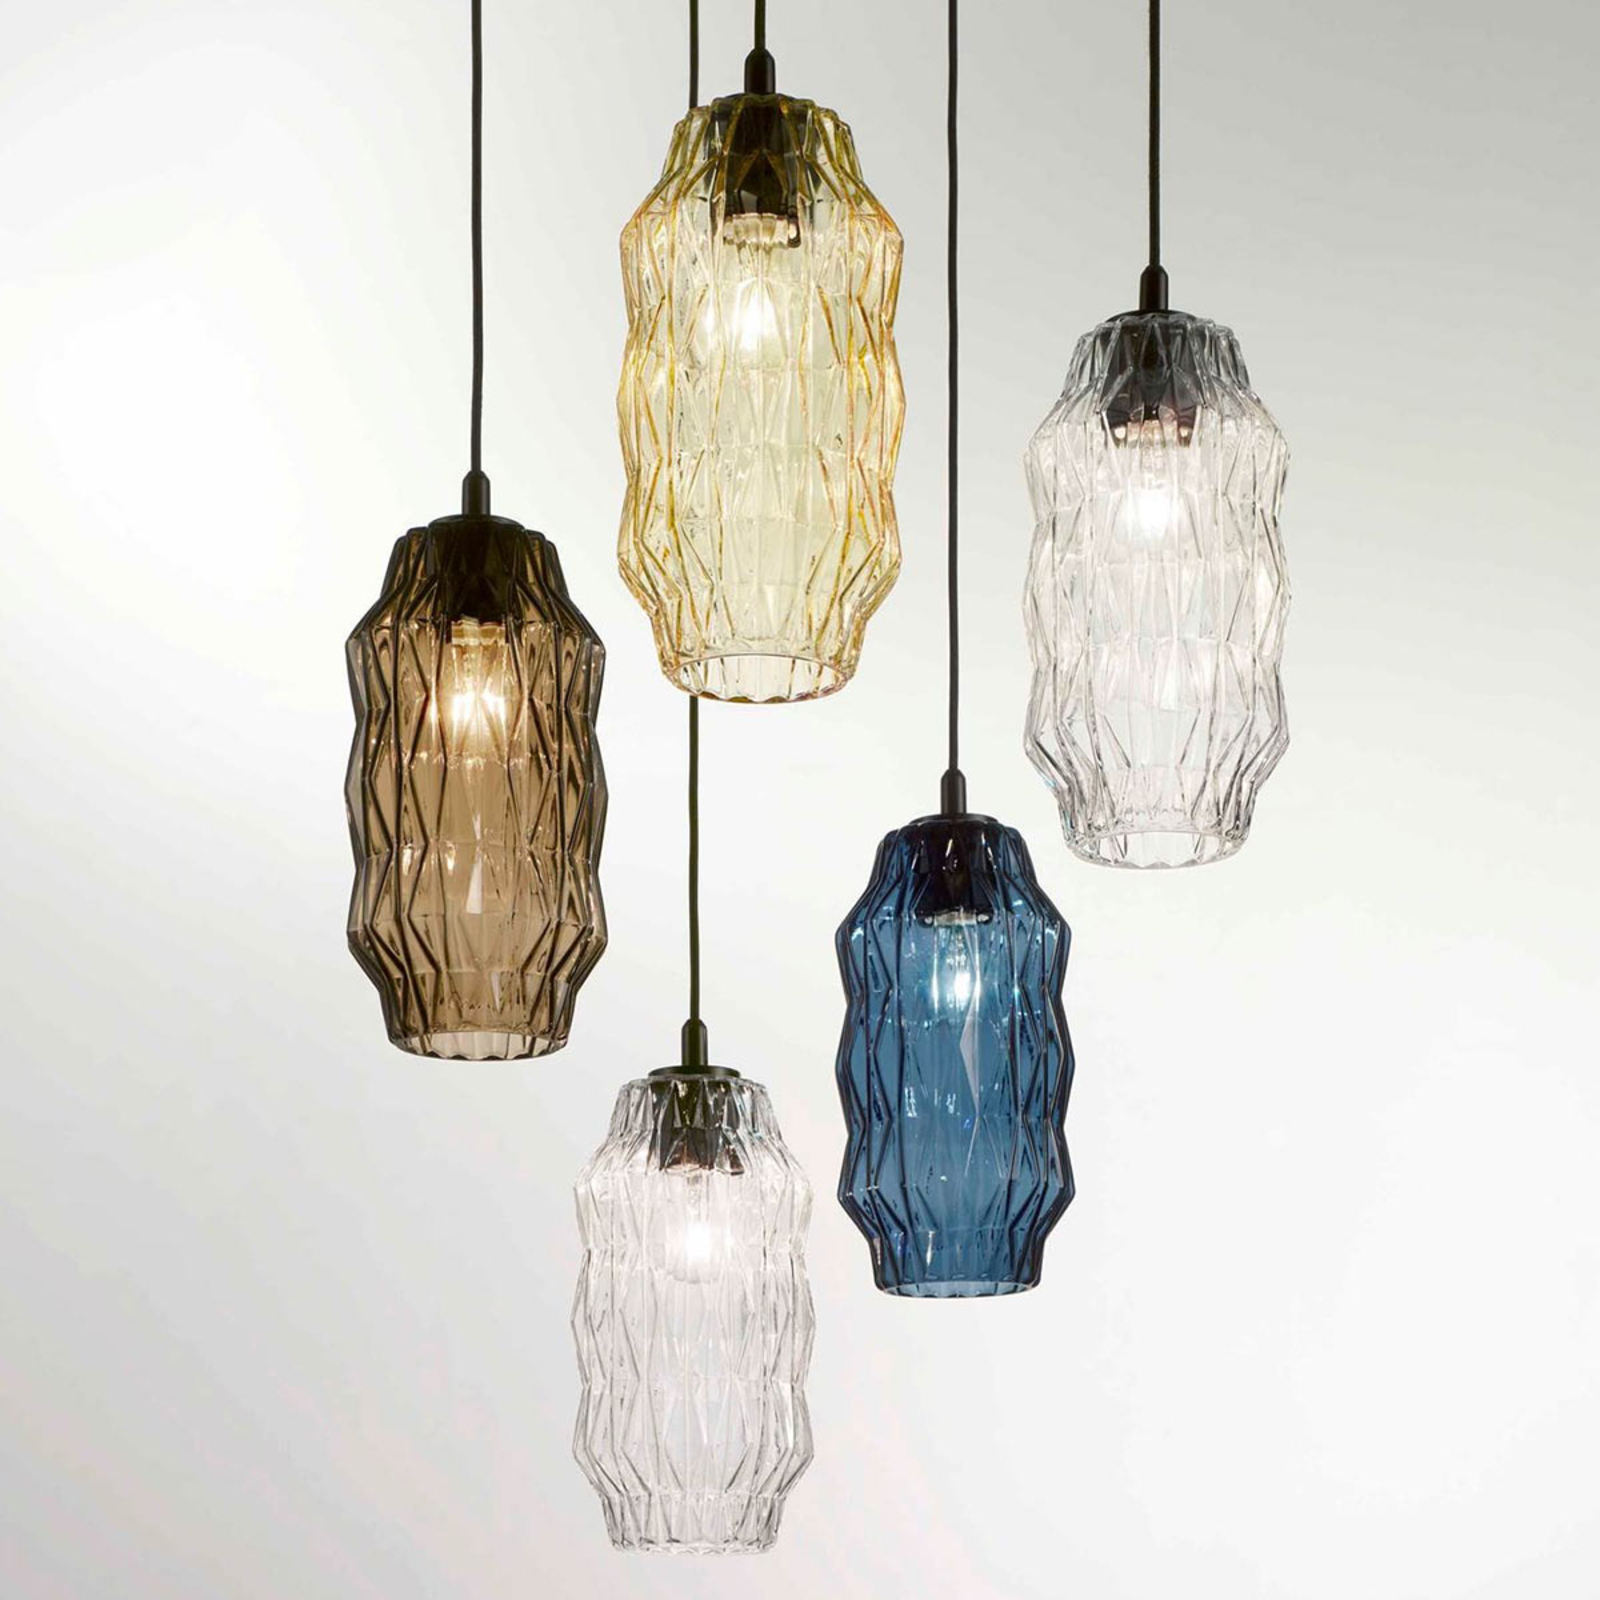 Origami pendant light made of glass, grey-brown